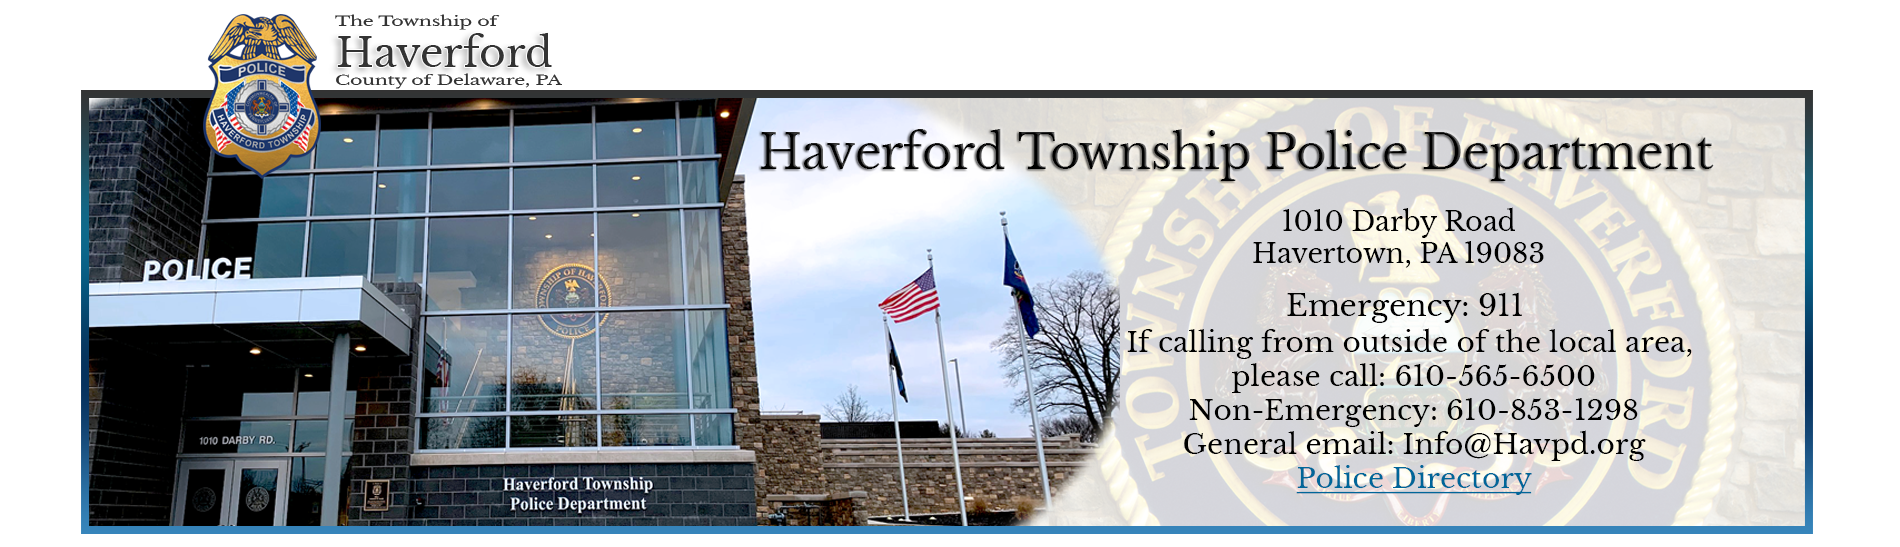 haverford township police department